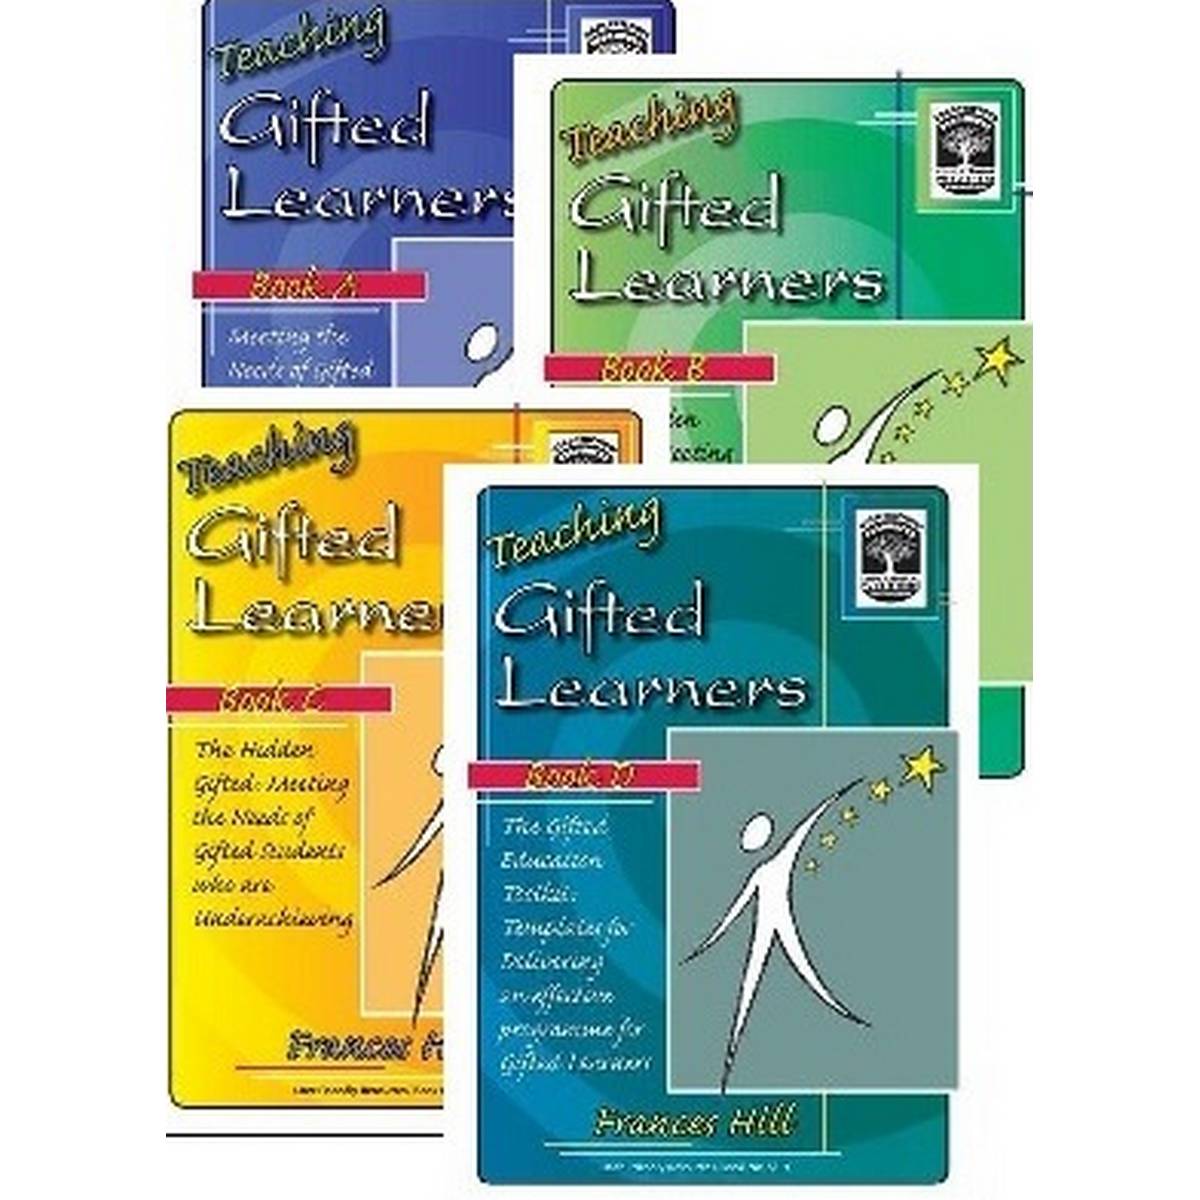 Teaching Gifted Learners Set of 4 Books